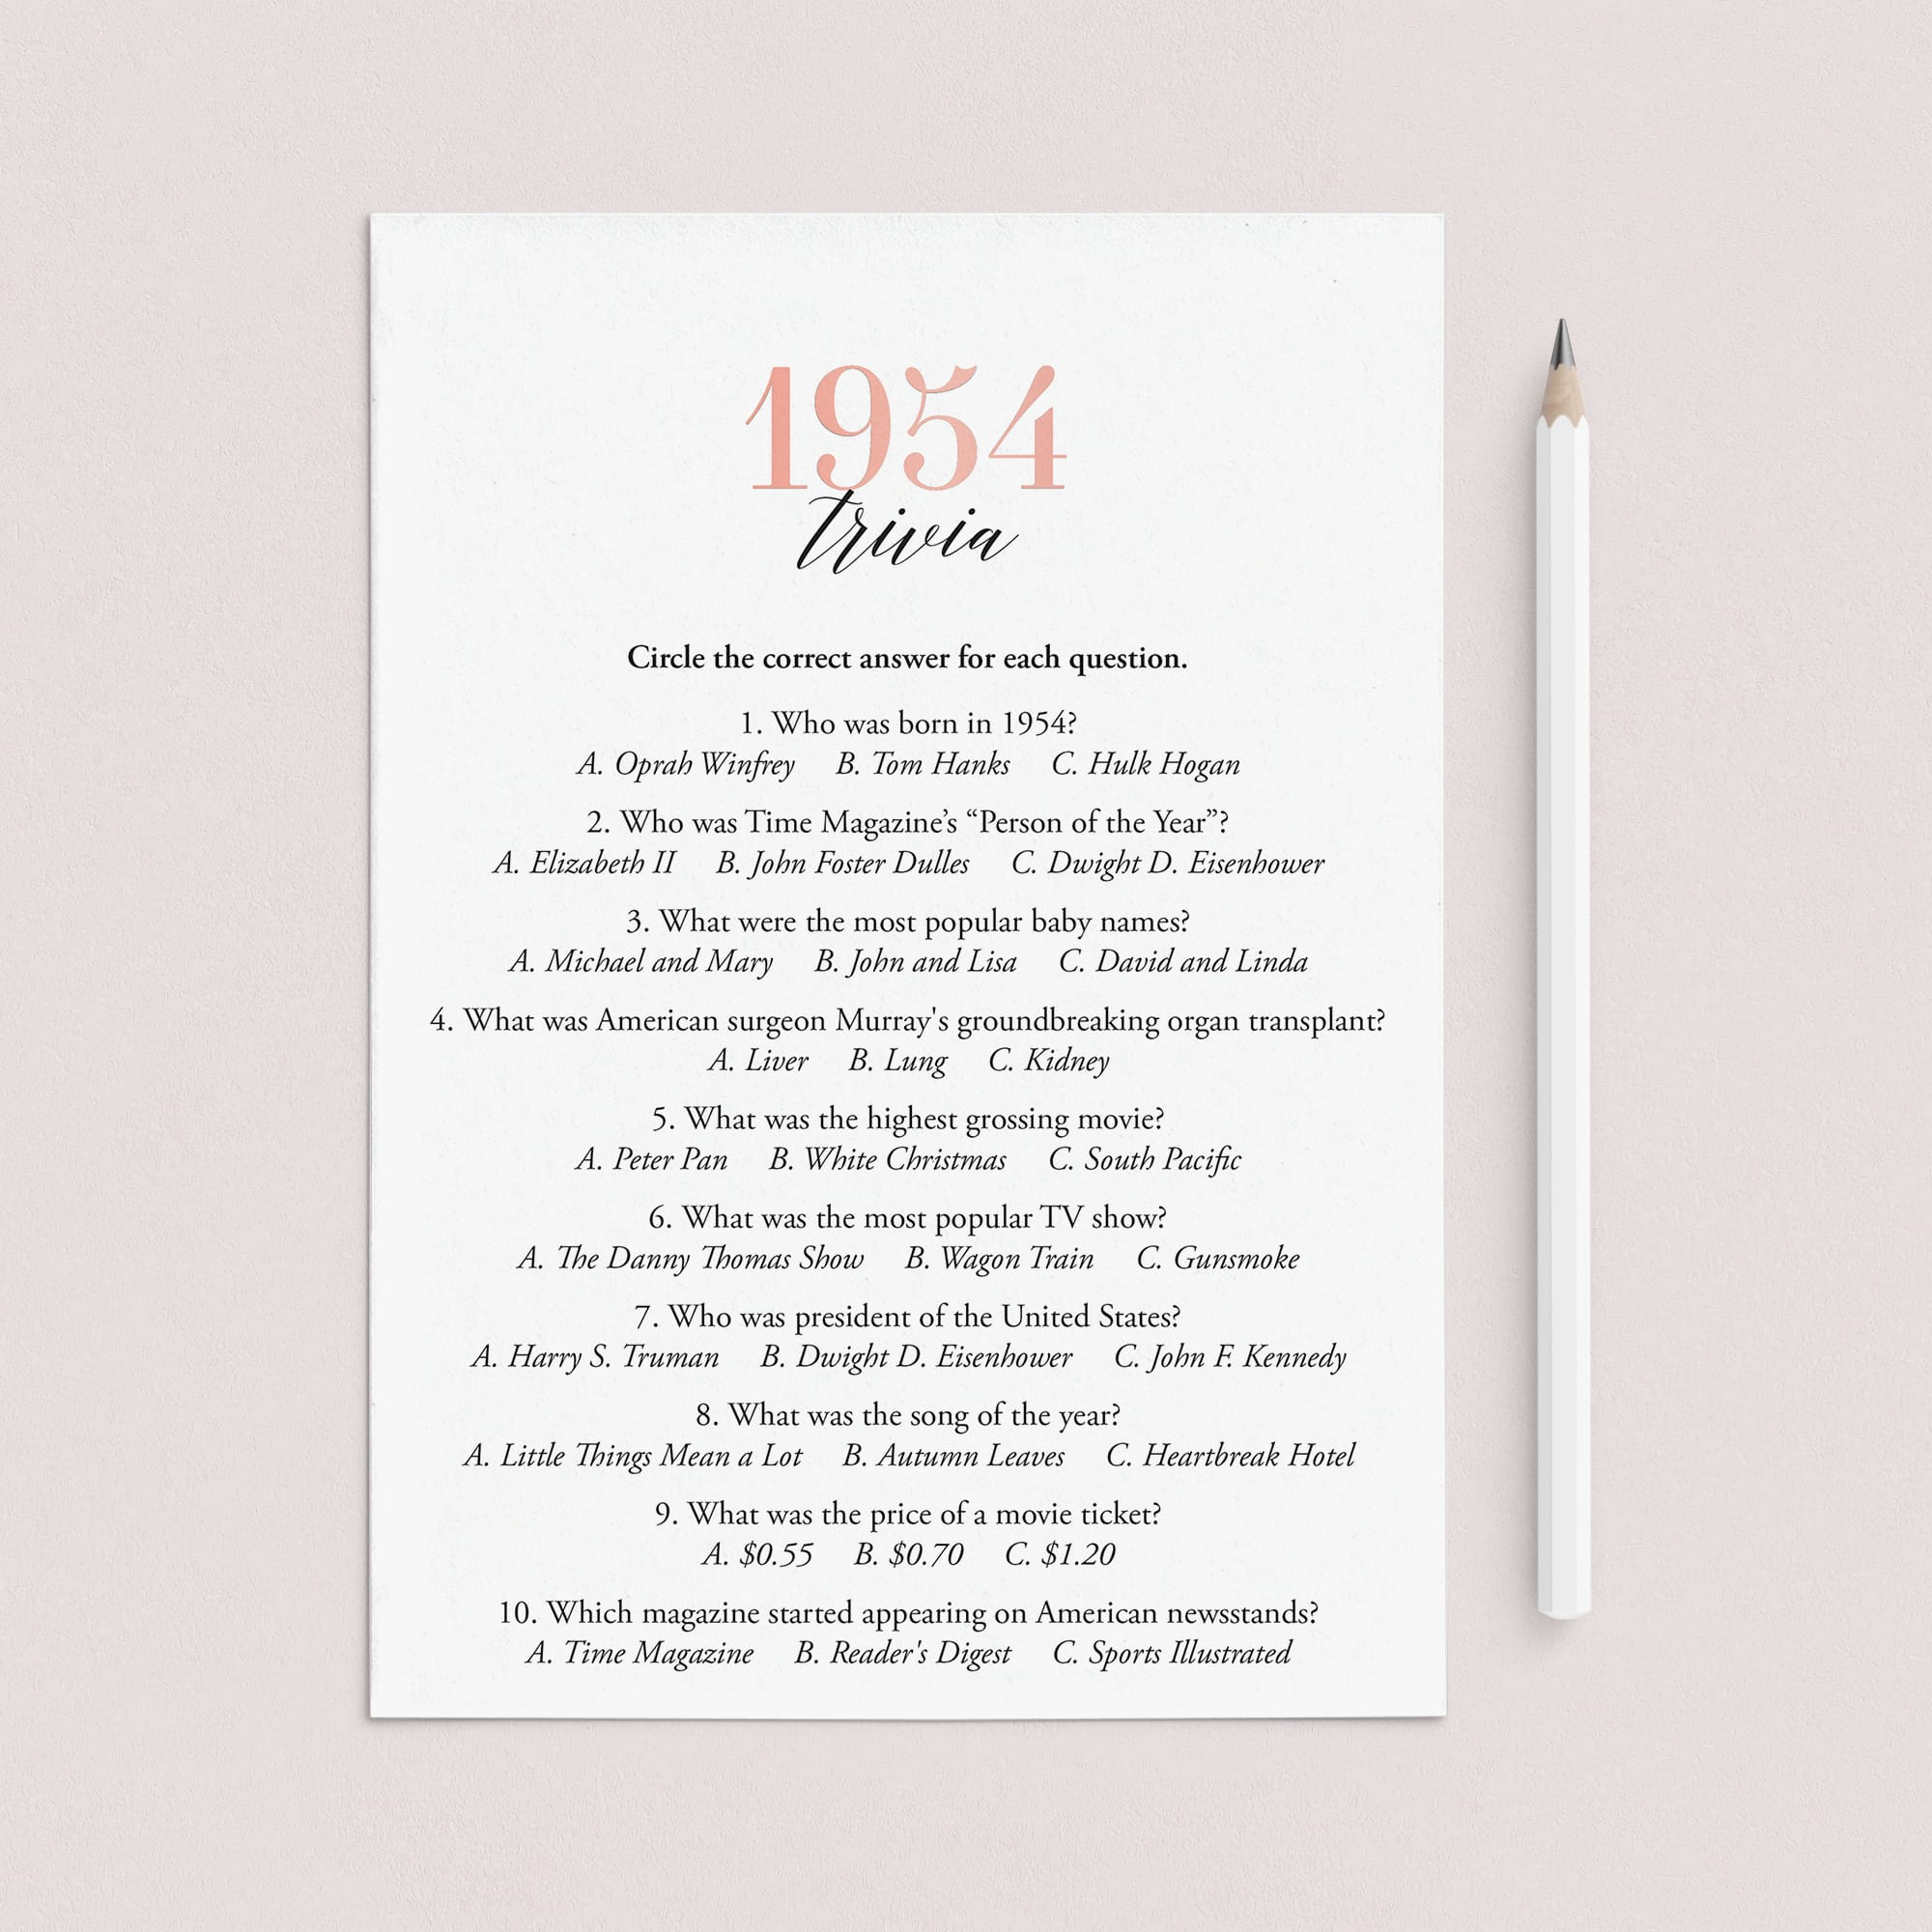 1954 Trivia Questions and Answers Printable by LittleSizzle